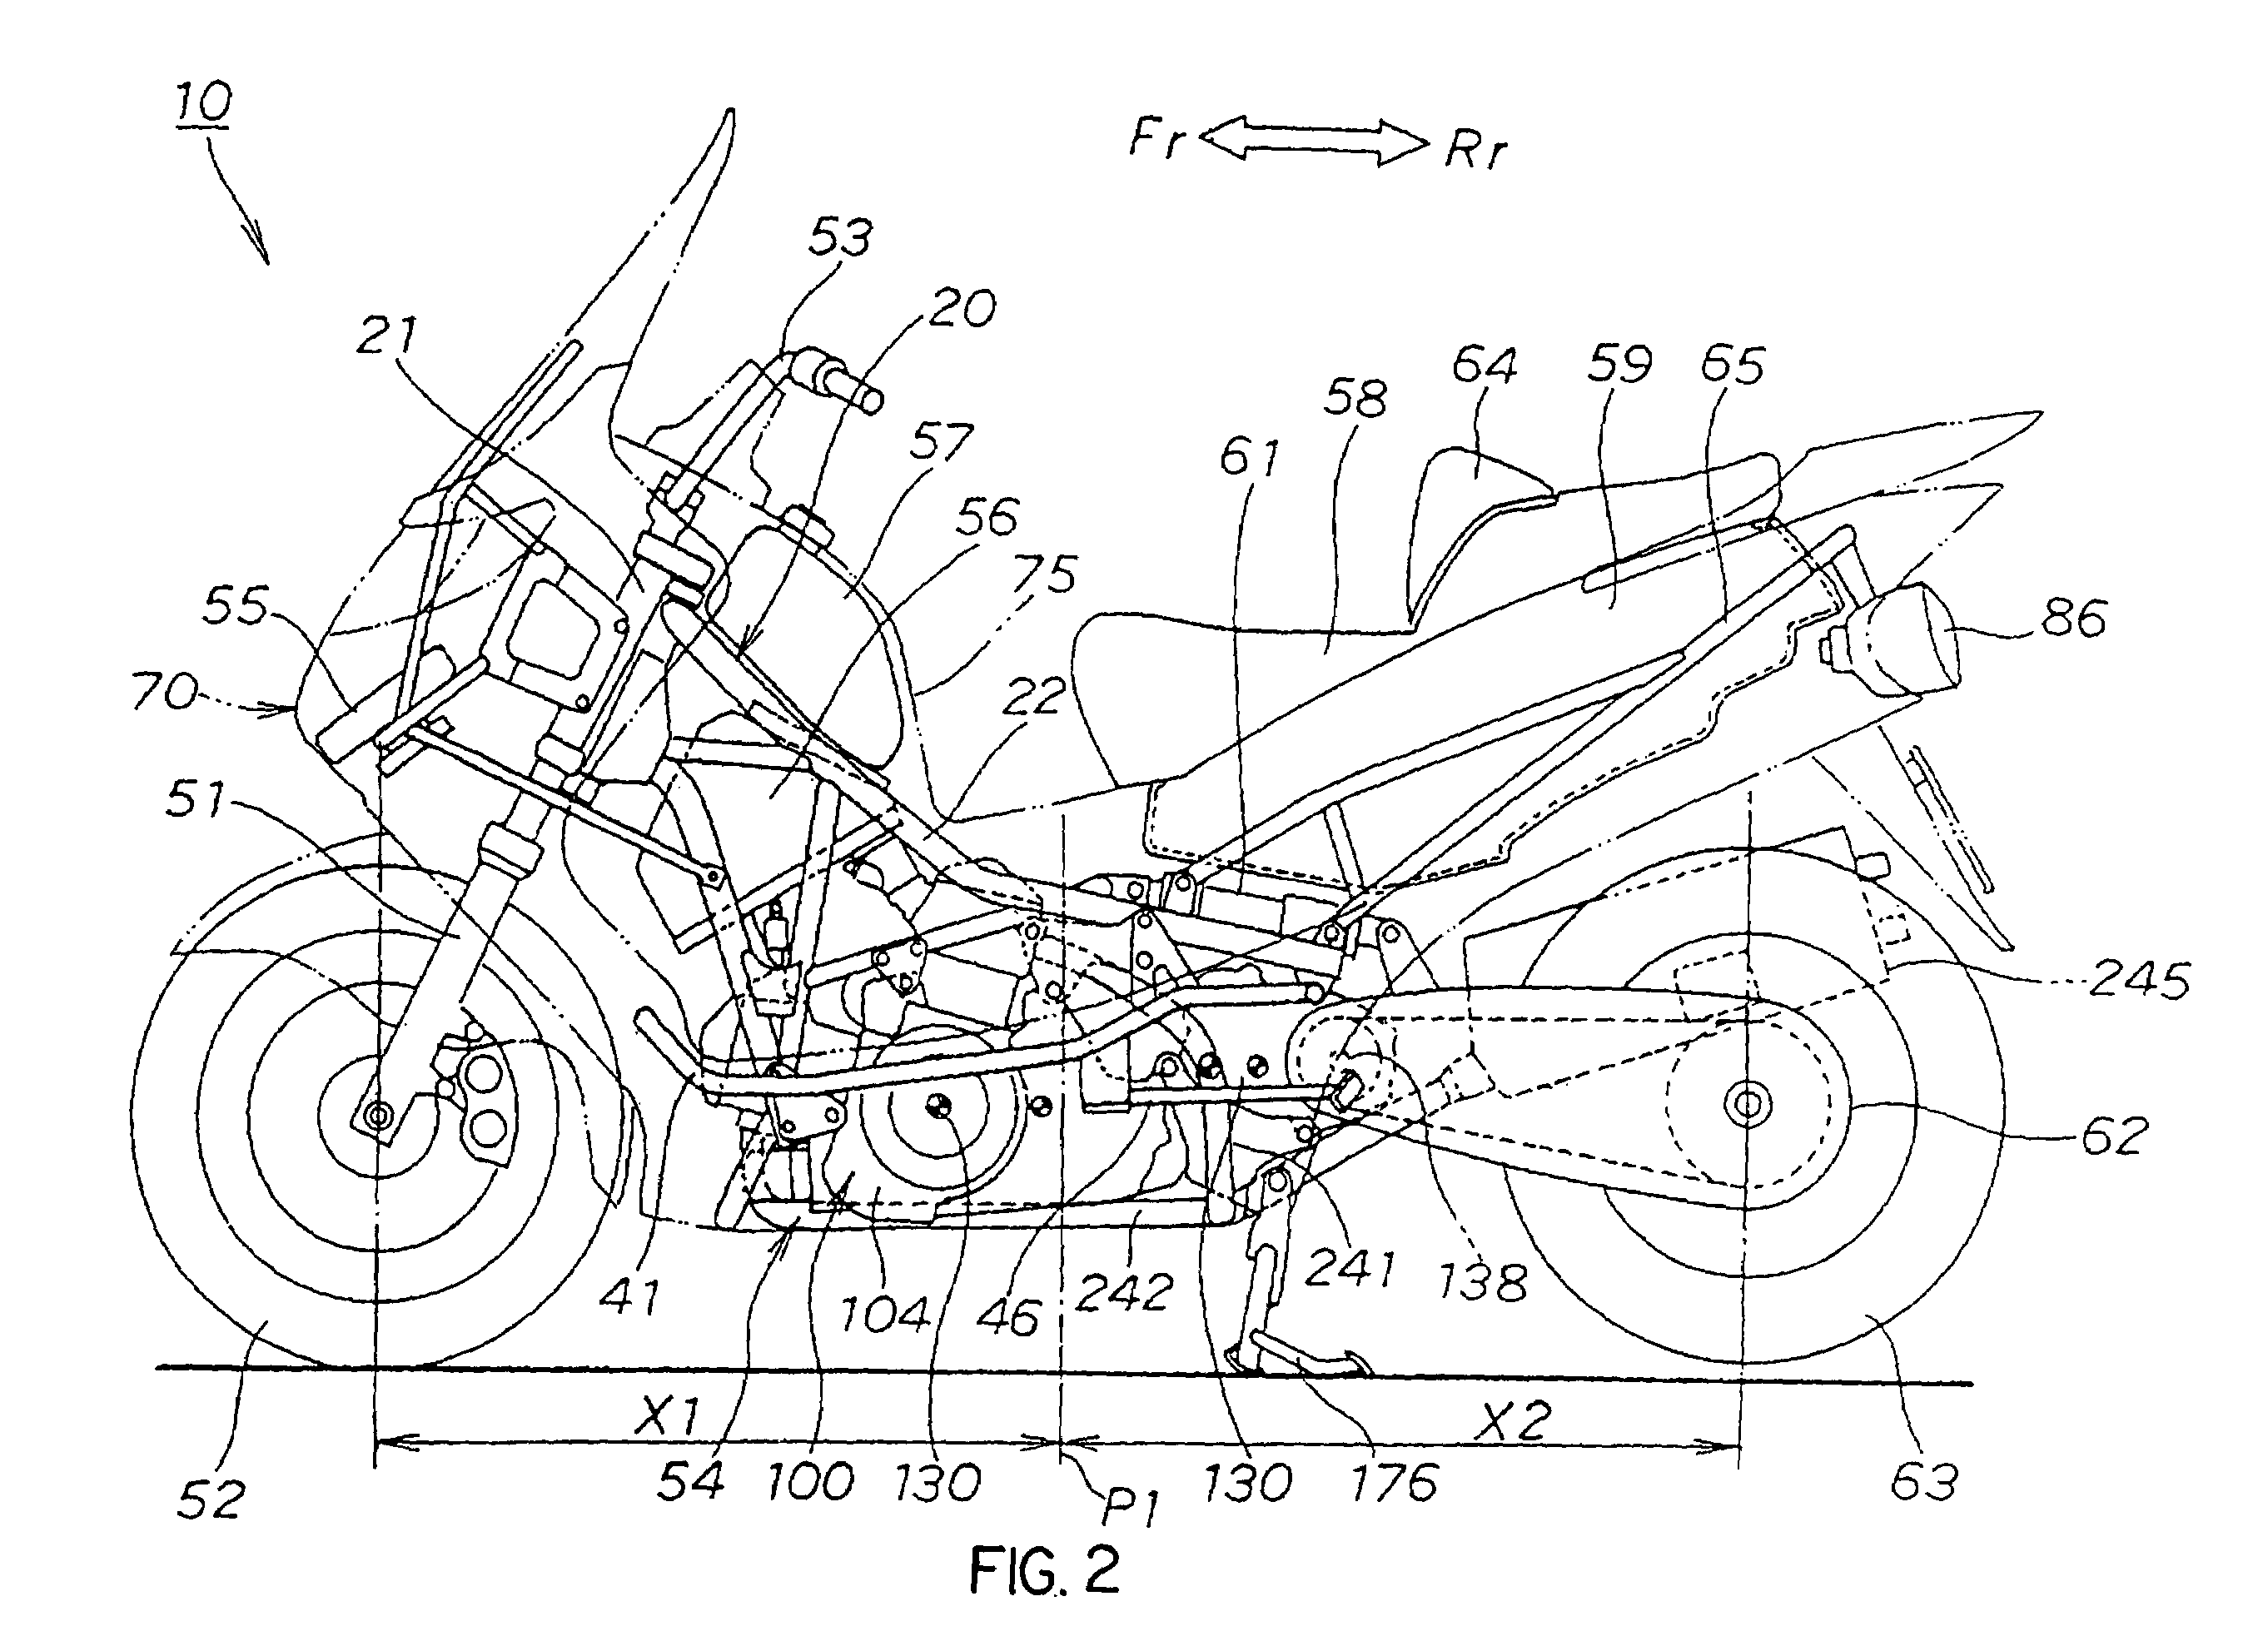 Exhaust pipe structure of vehicle with low floor